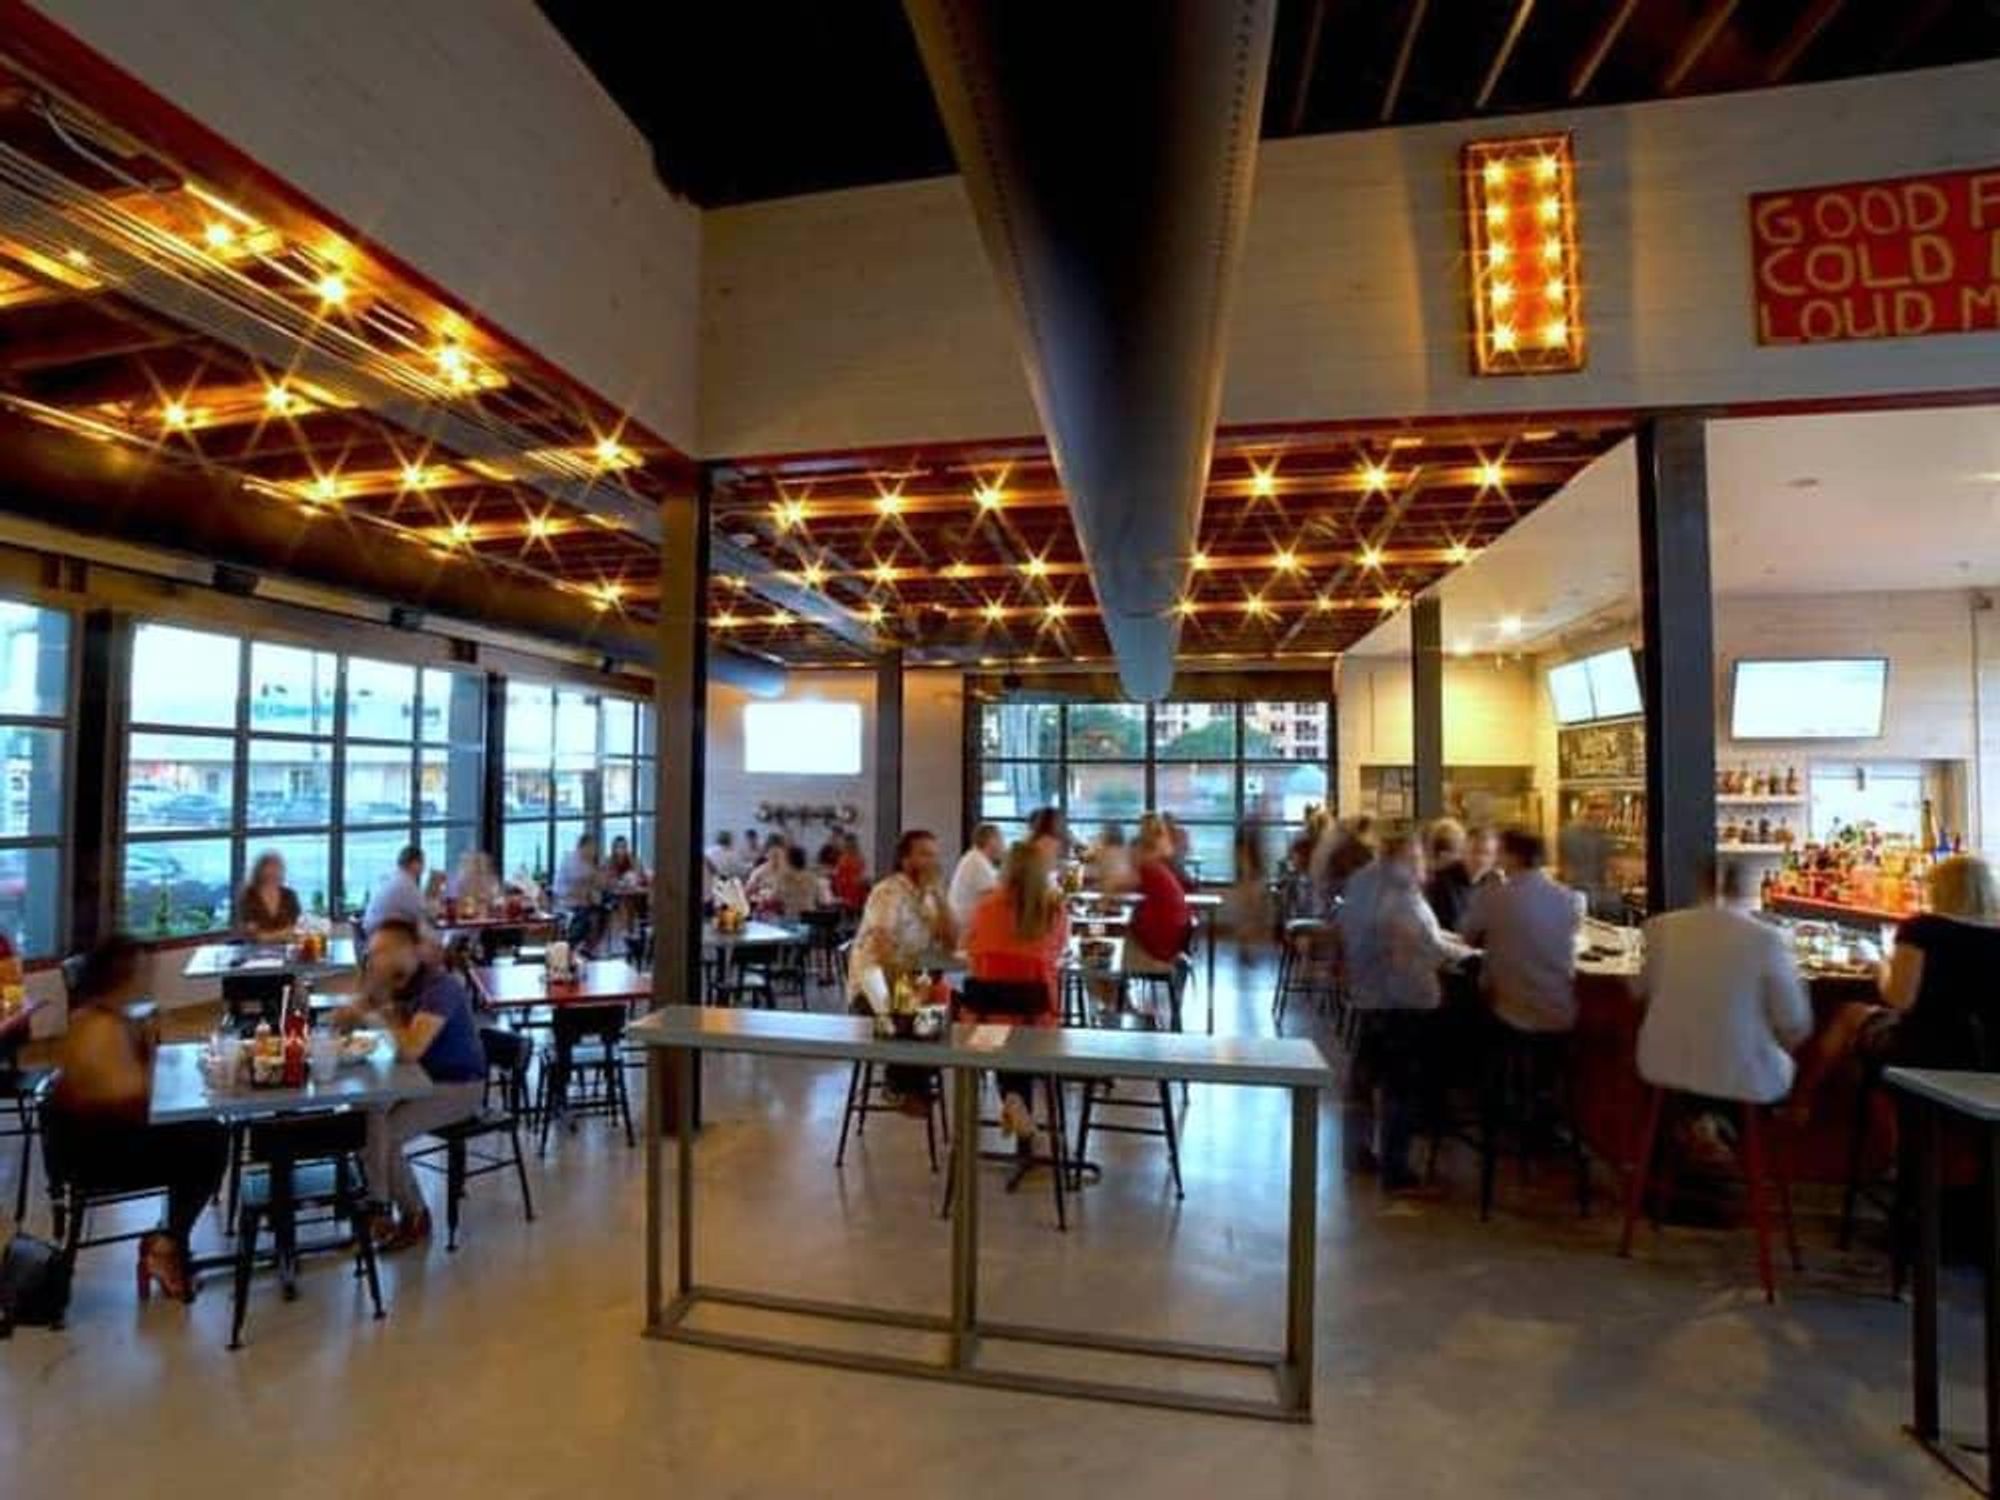 The Galleria Opens a Fancy New Wing of Restaurants and Stores